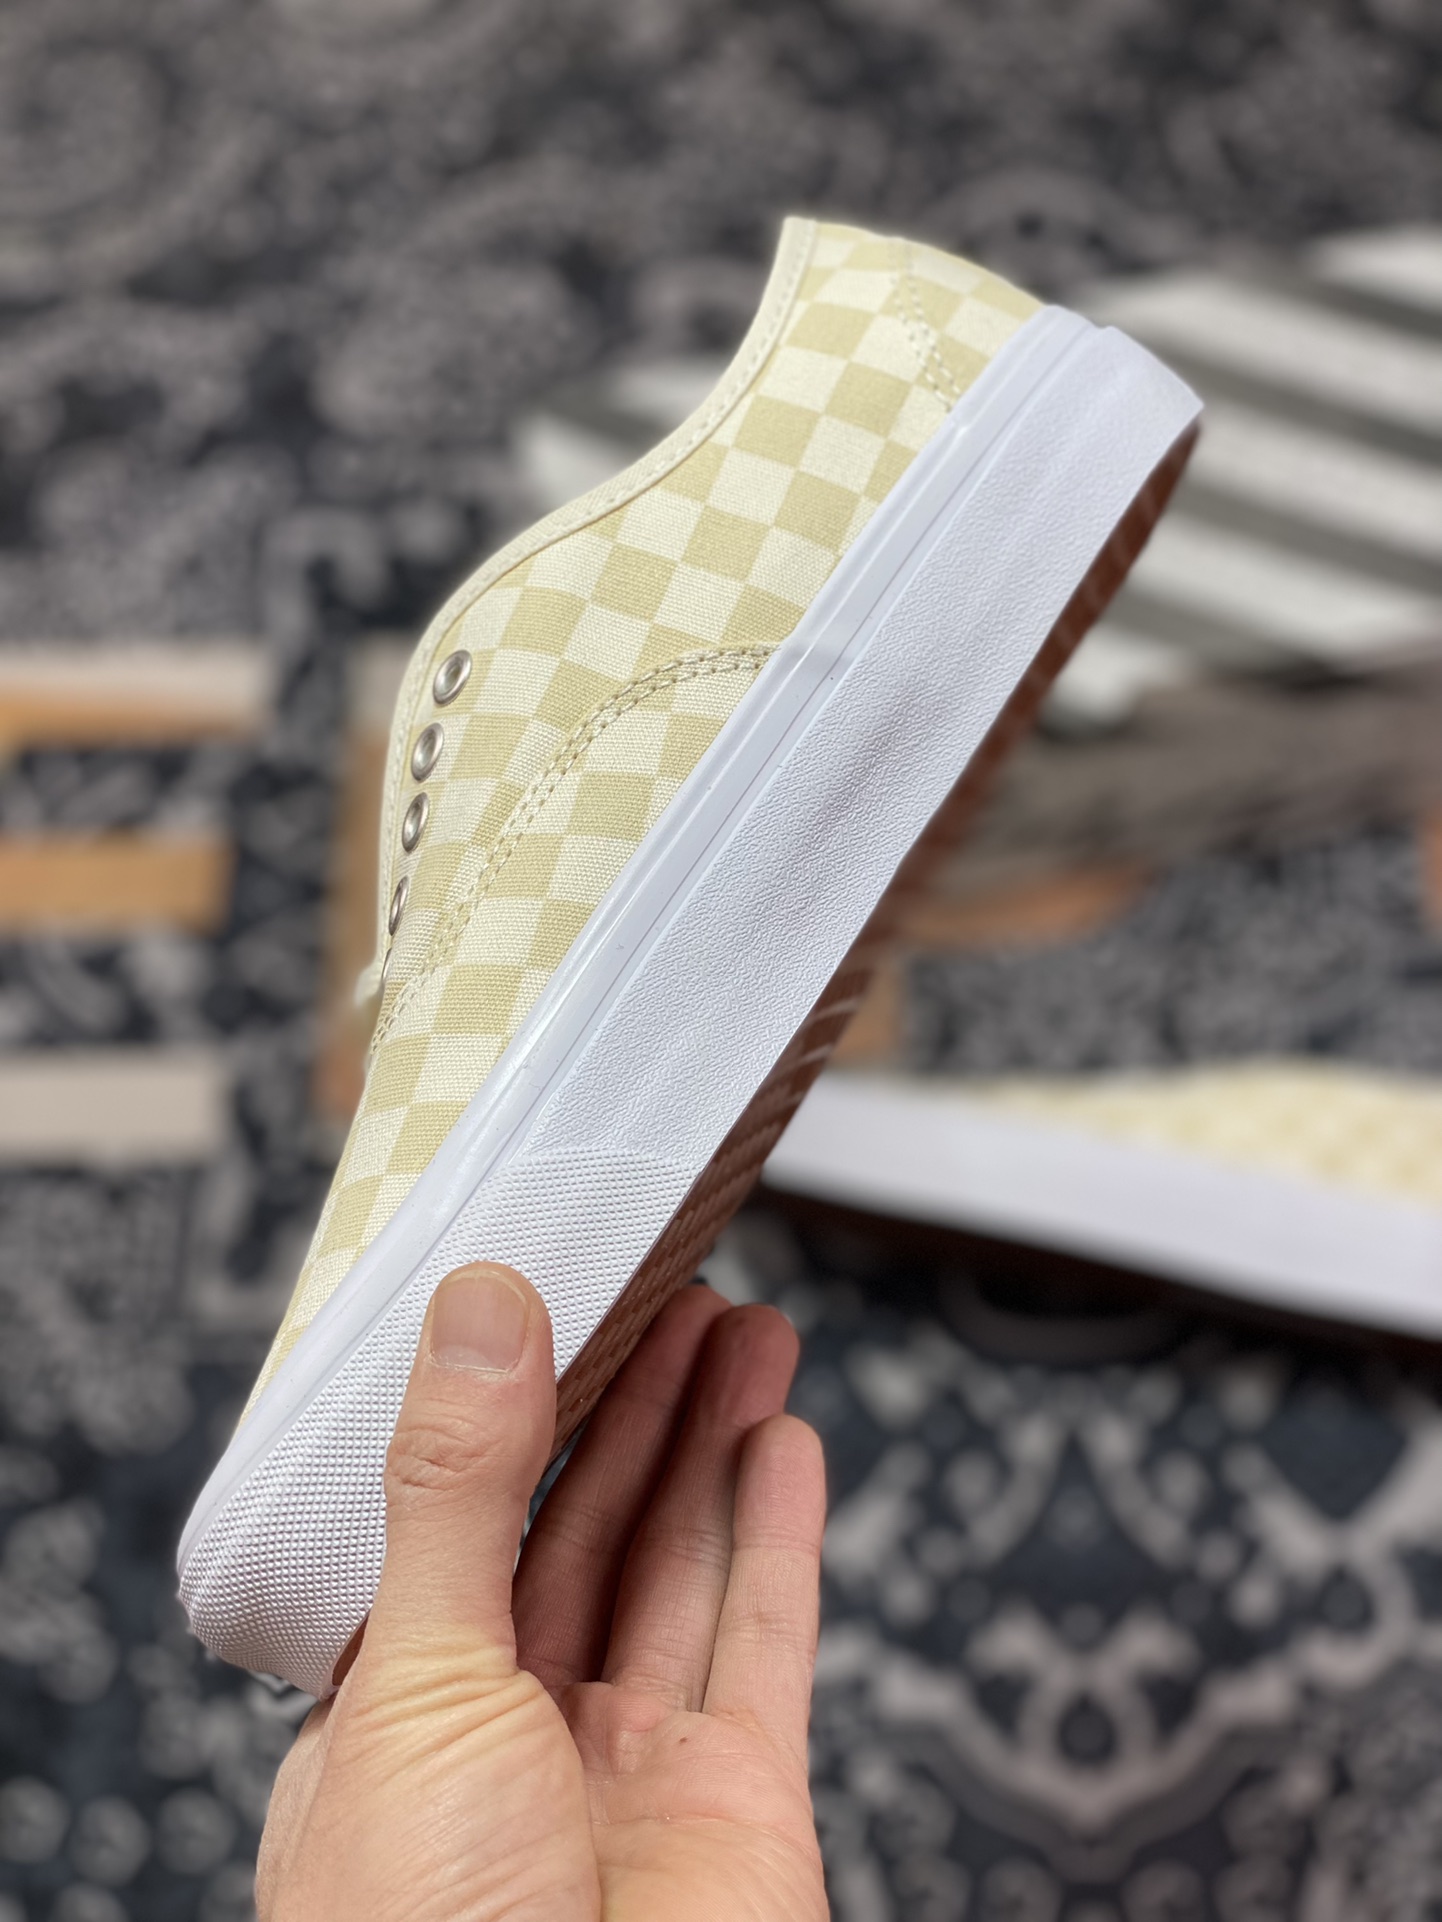 Vans Vault OG Authentic yellow and white checkerboard retro casual canvas shoes